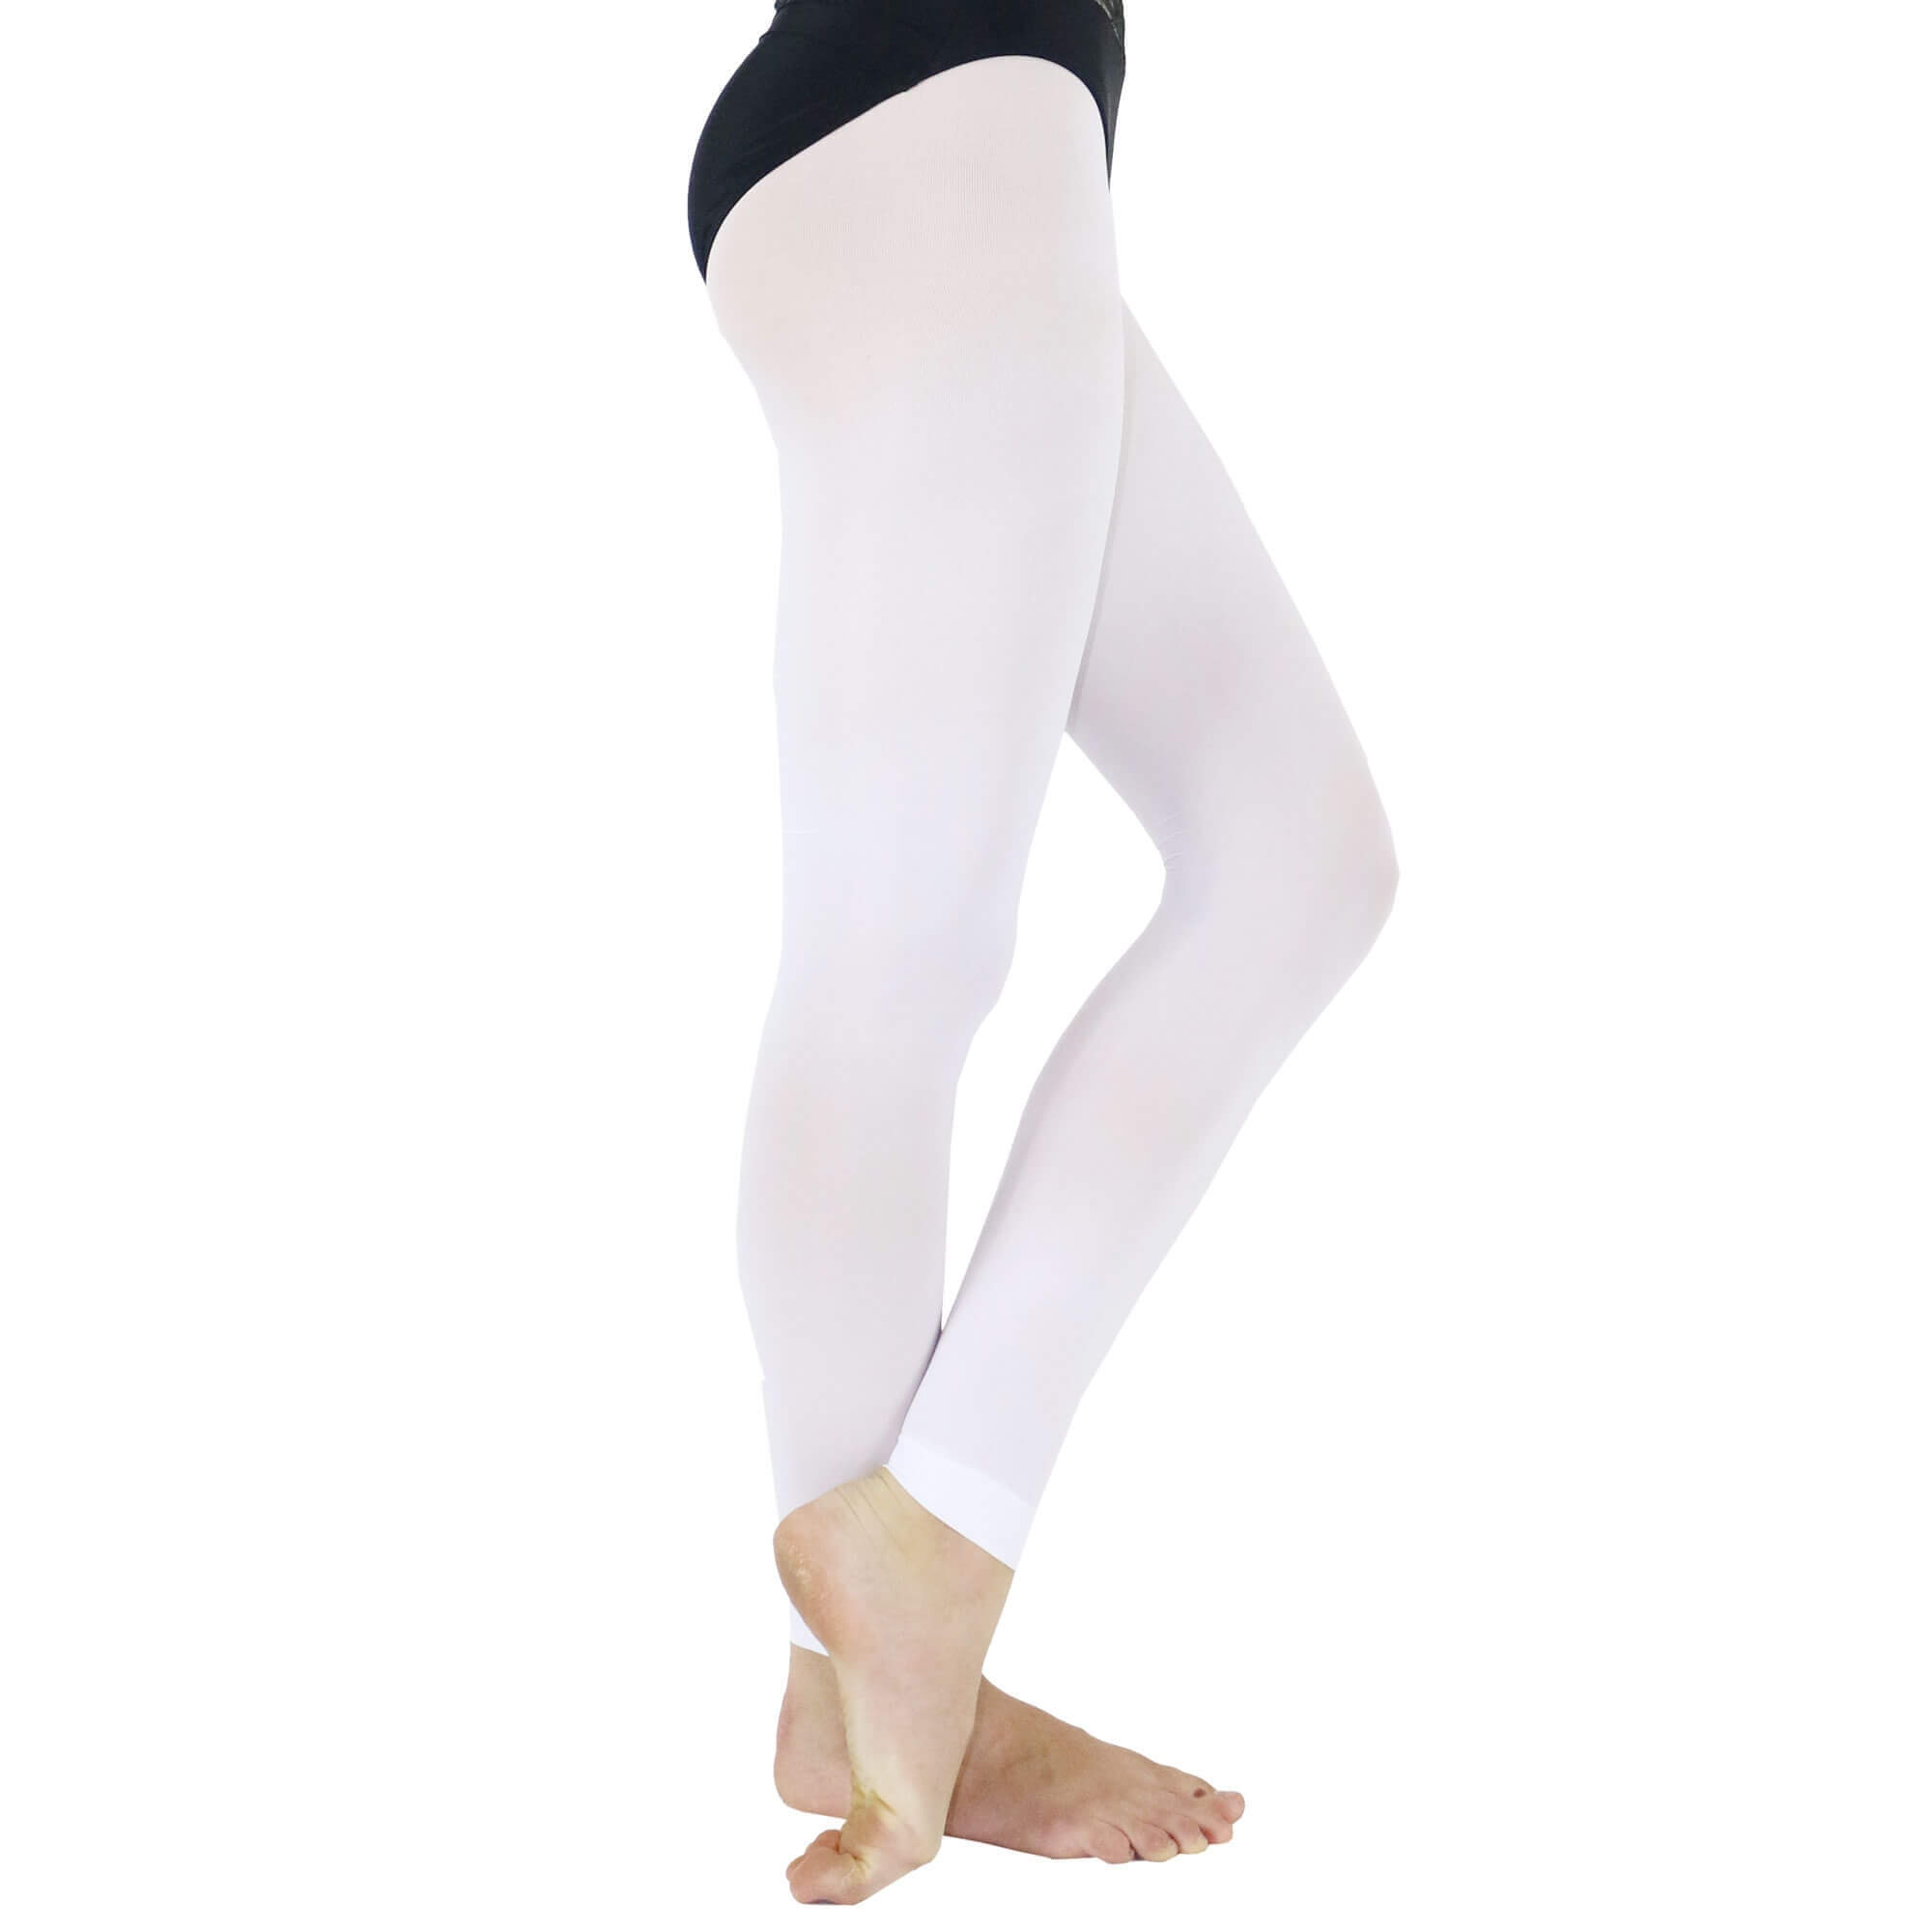 Danzcue Adult Soft Footless Tights - Click Image to Close